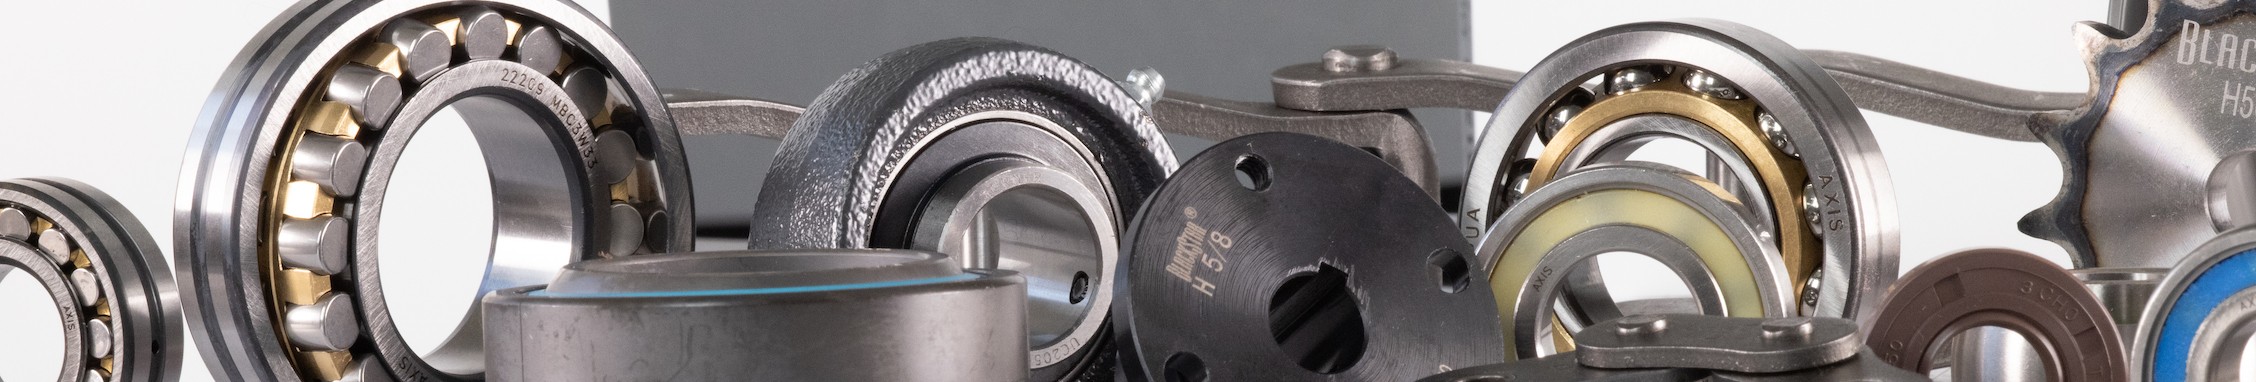 How to Determine Bearing Shaft and Housing Fit - Baart Group